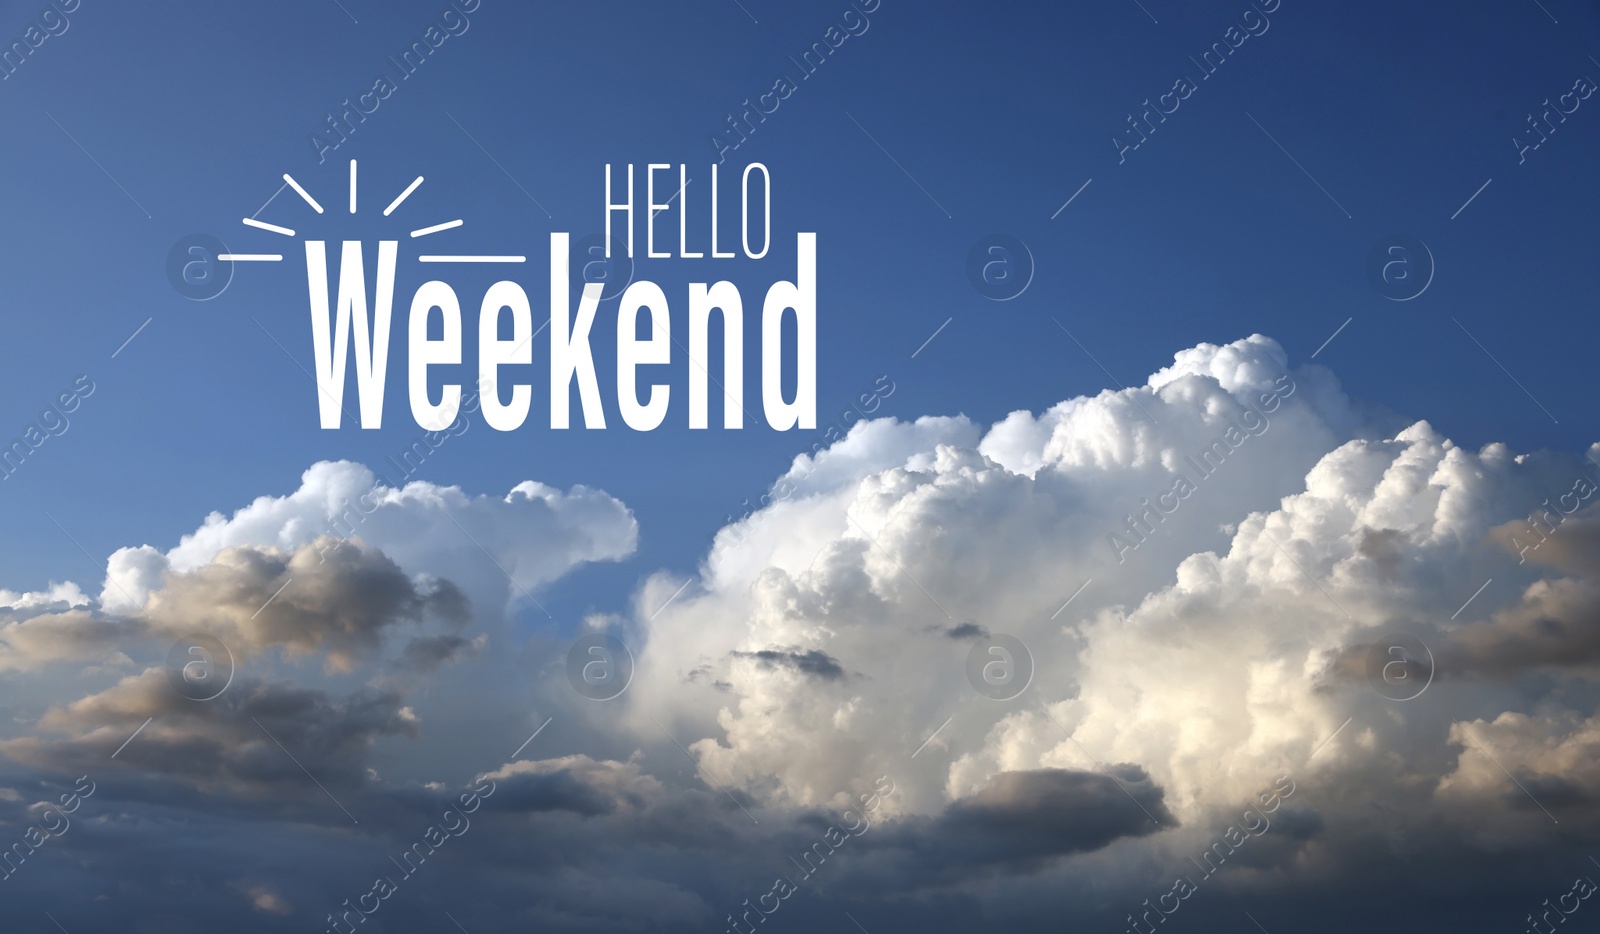 Image of Hello Weekend. Beautiful view of fluffy white clouds in blue sky